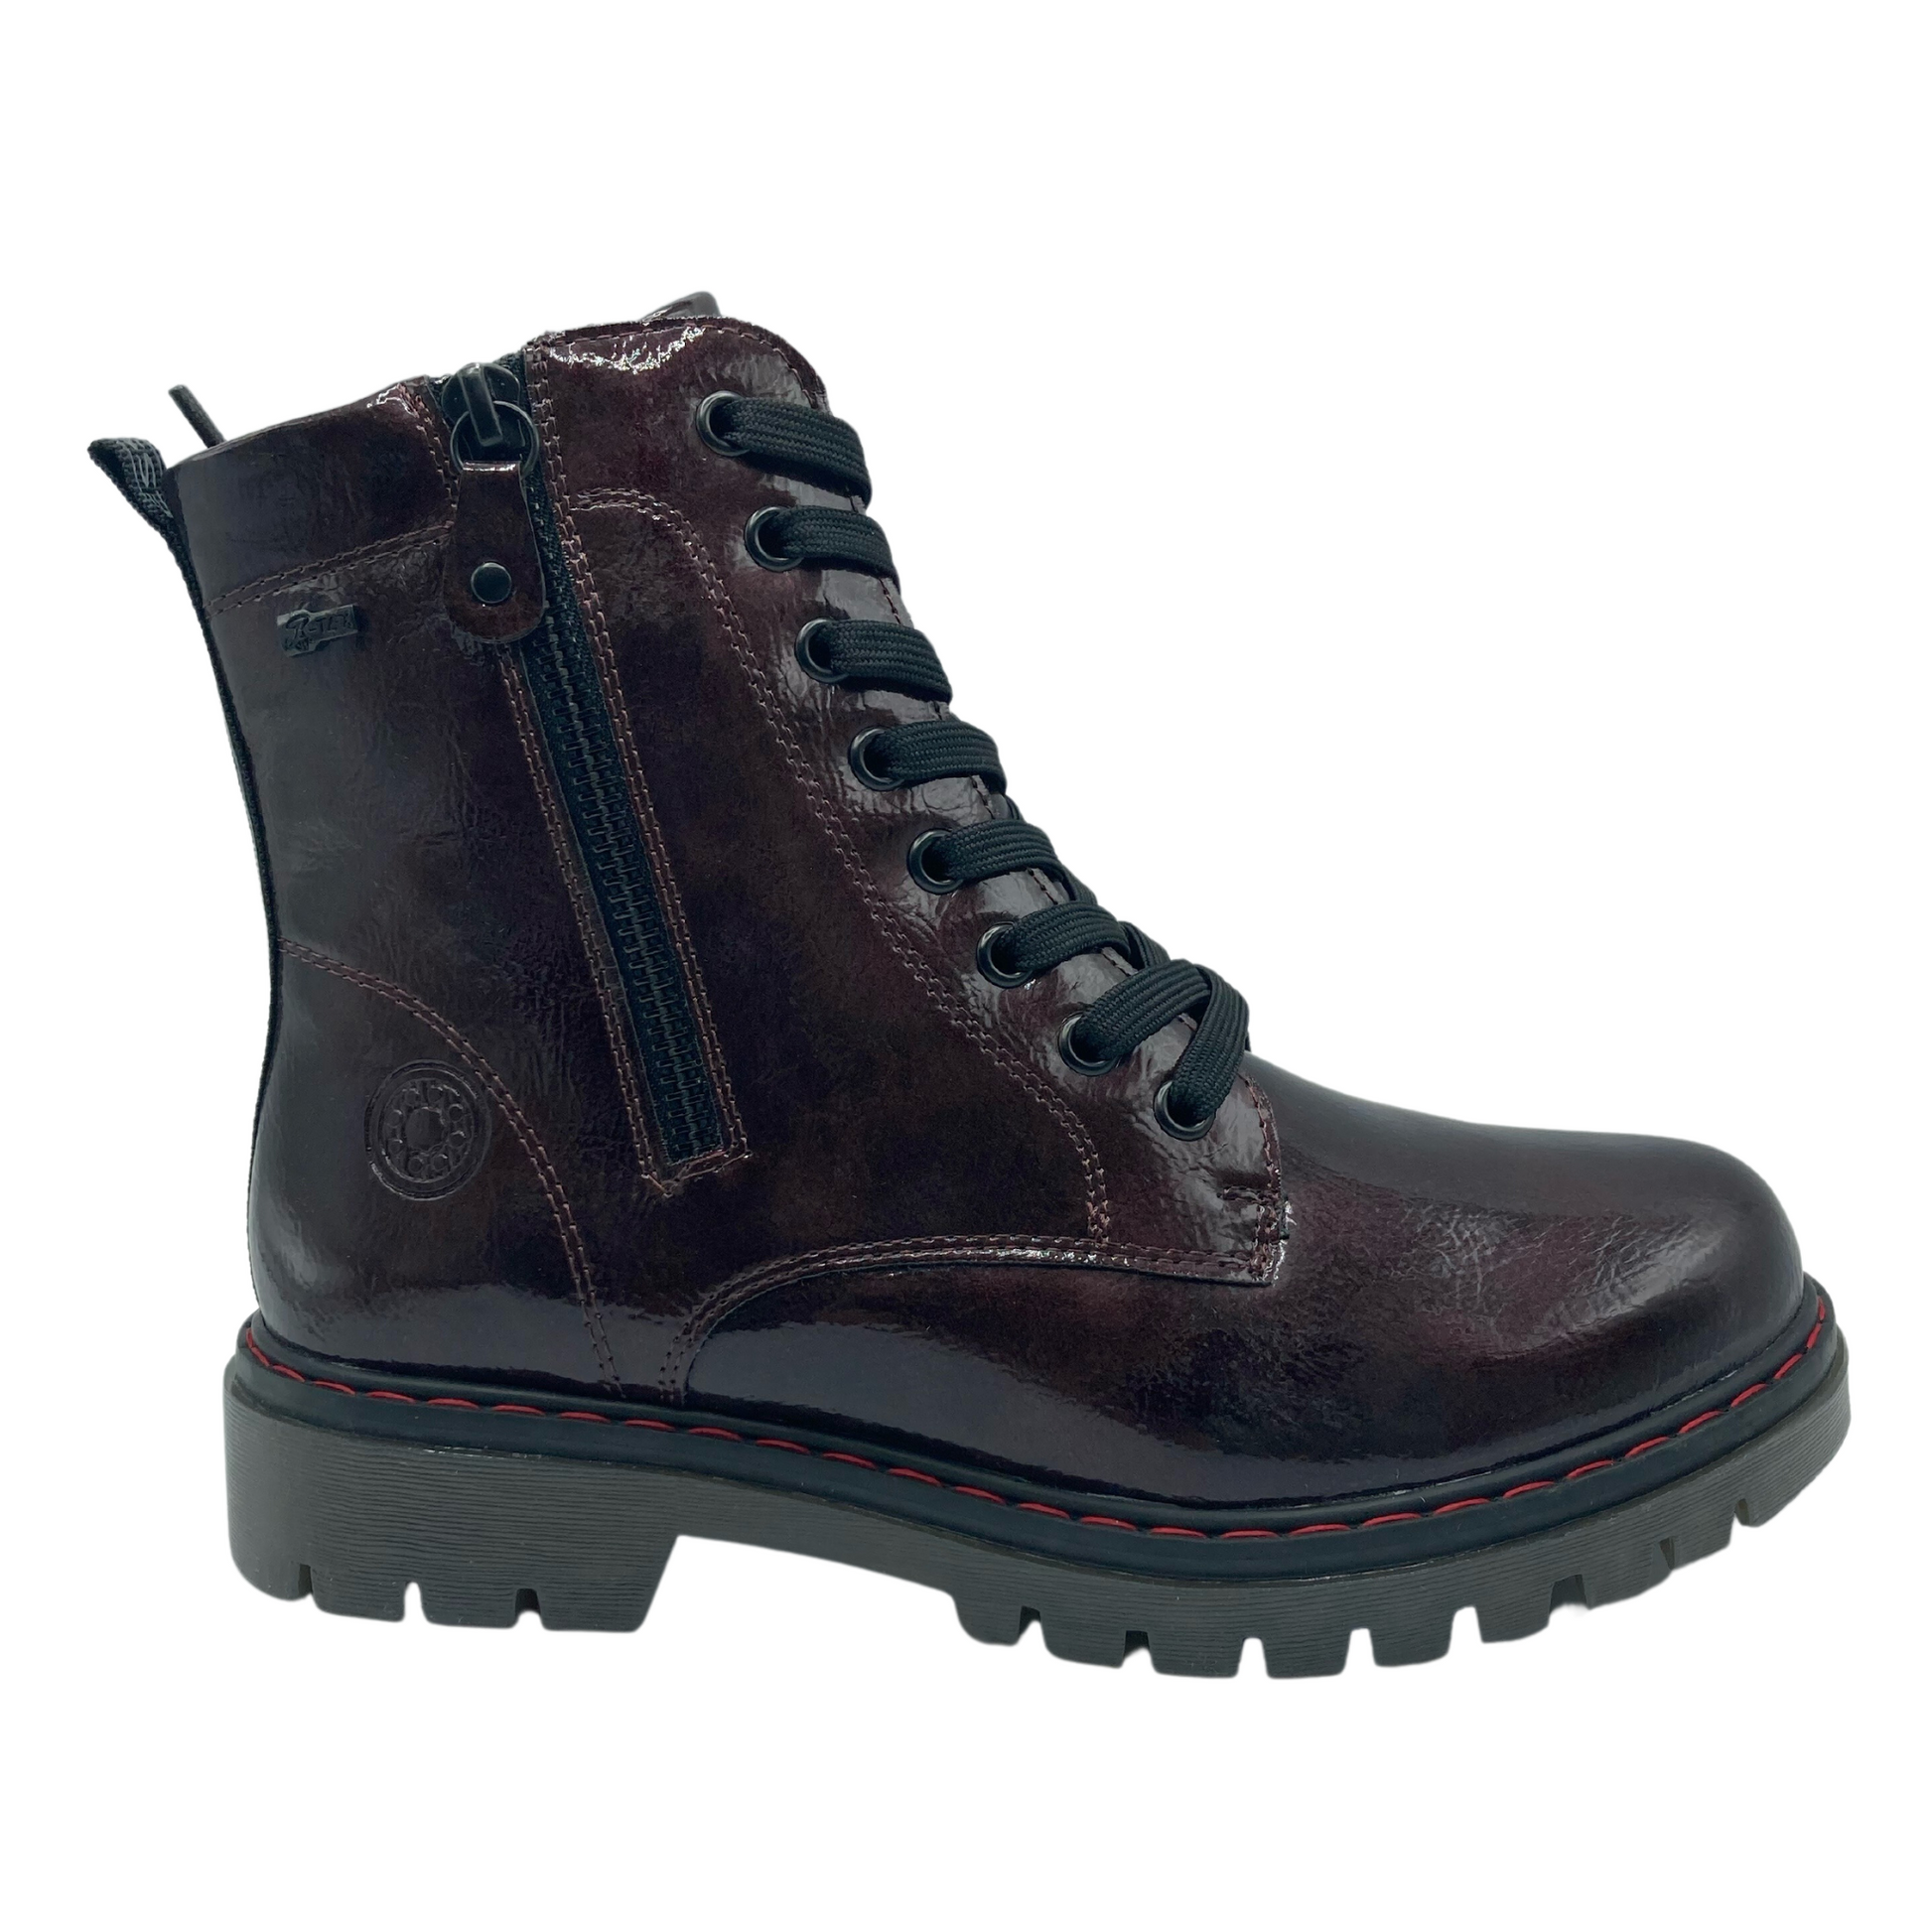 Right facing view of vegan leather boot with black laces and side zipper closure with grey and black rubber outsole